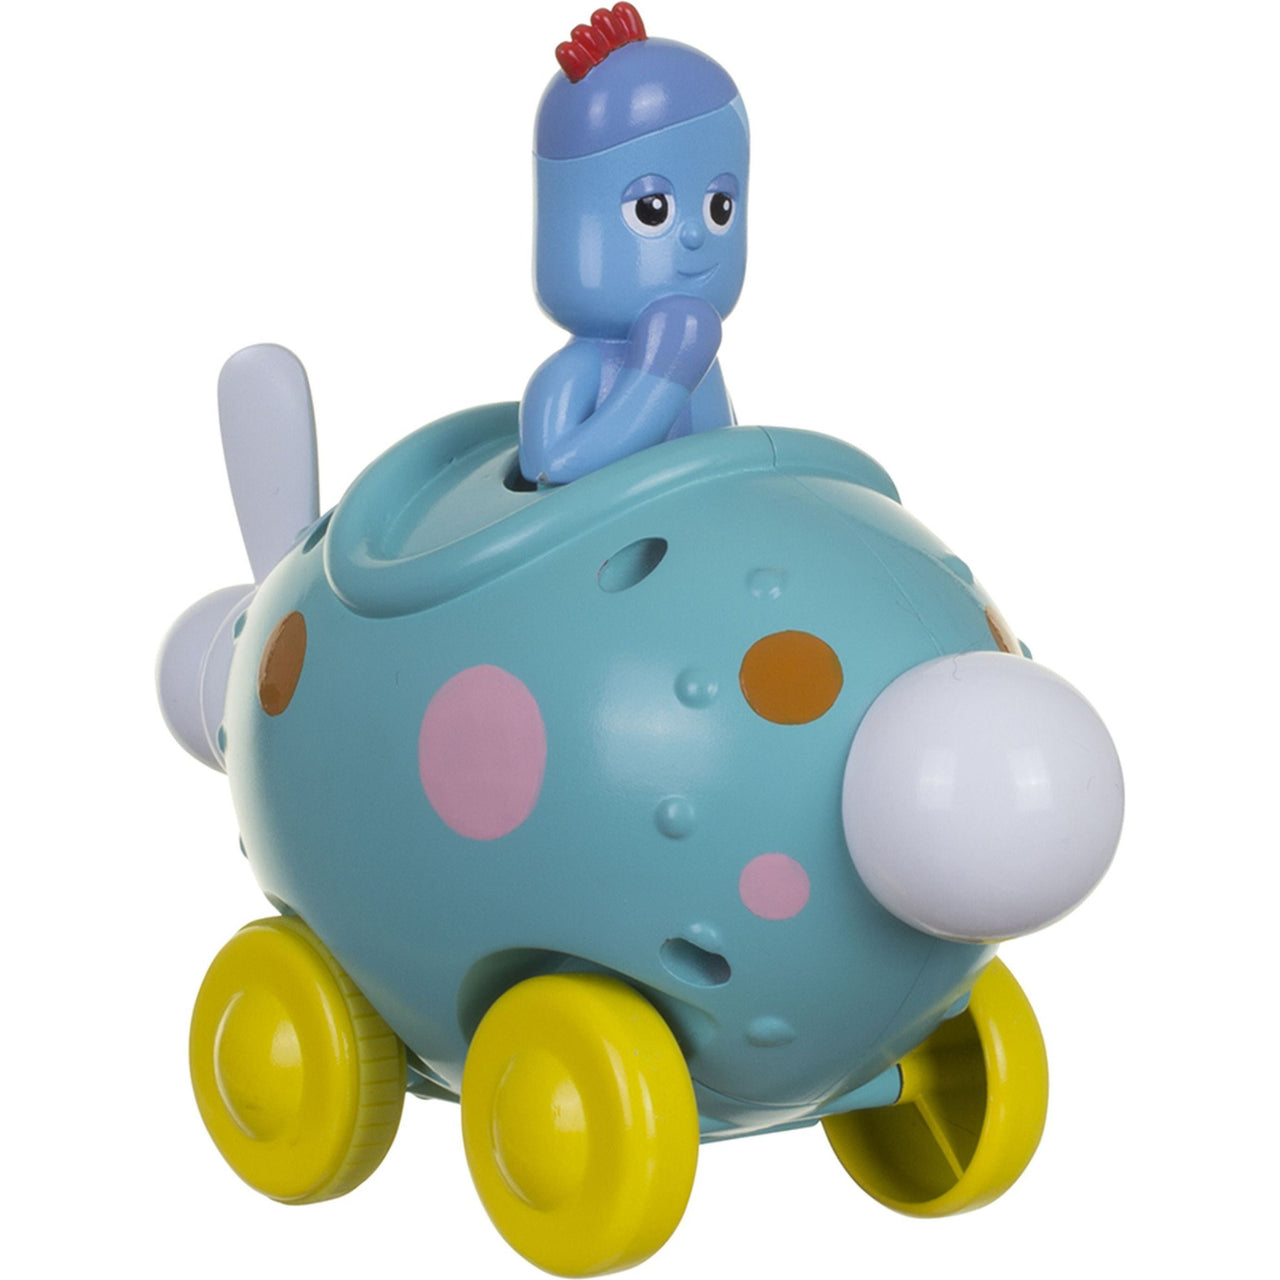 In The Night Garden Press & Go Vehicles Iggle Piggle Pinky Ponk In the Night Garden